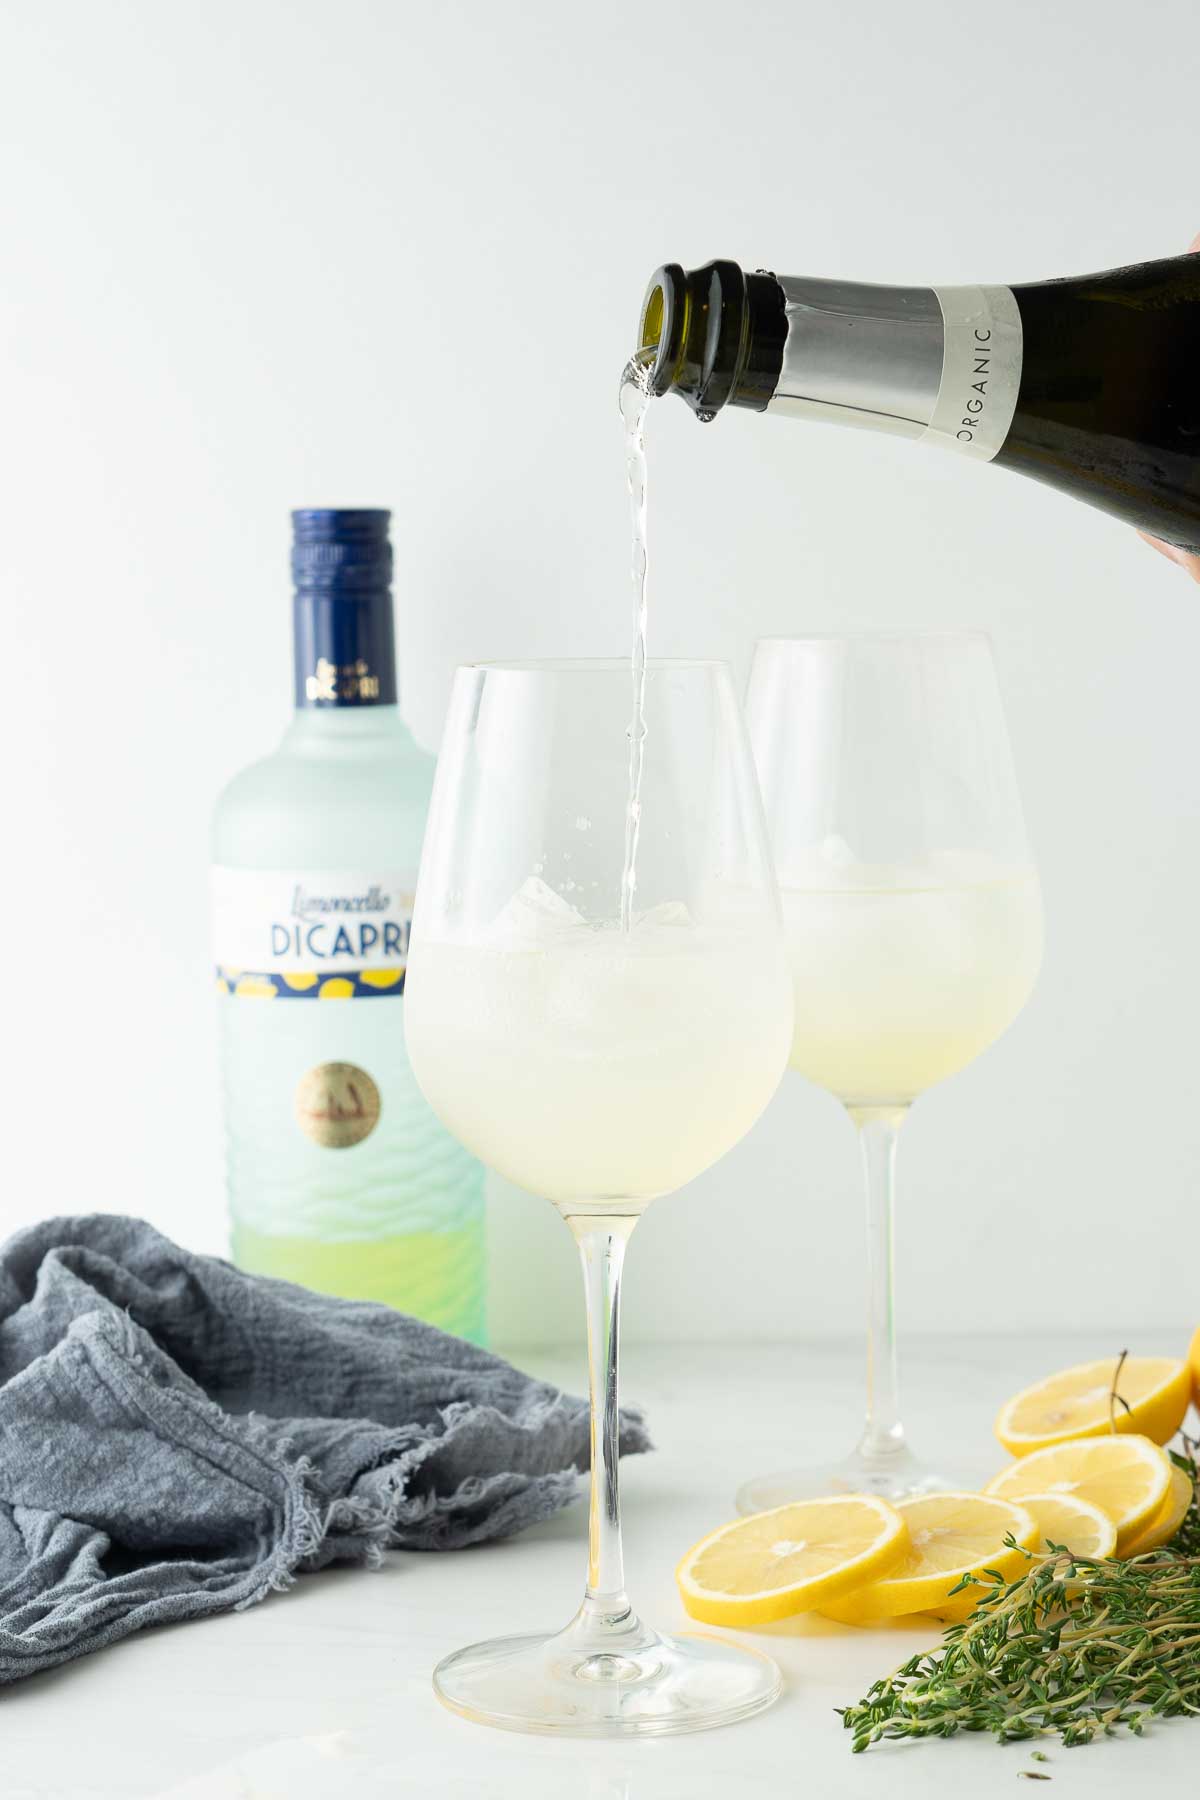 Making limoncello spritz by pouring in prosecco.